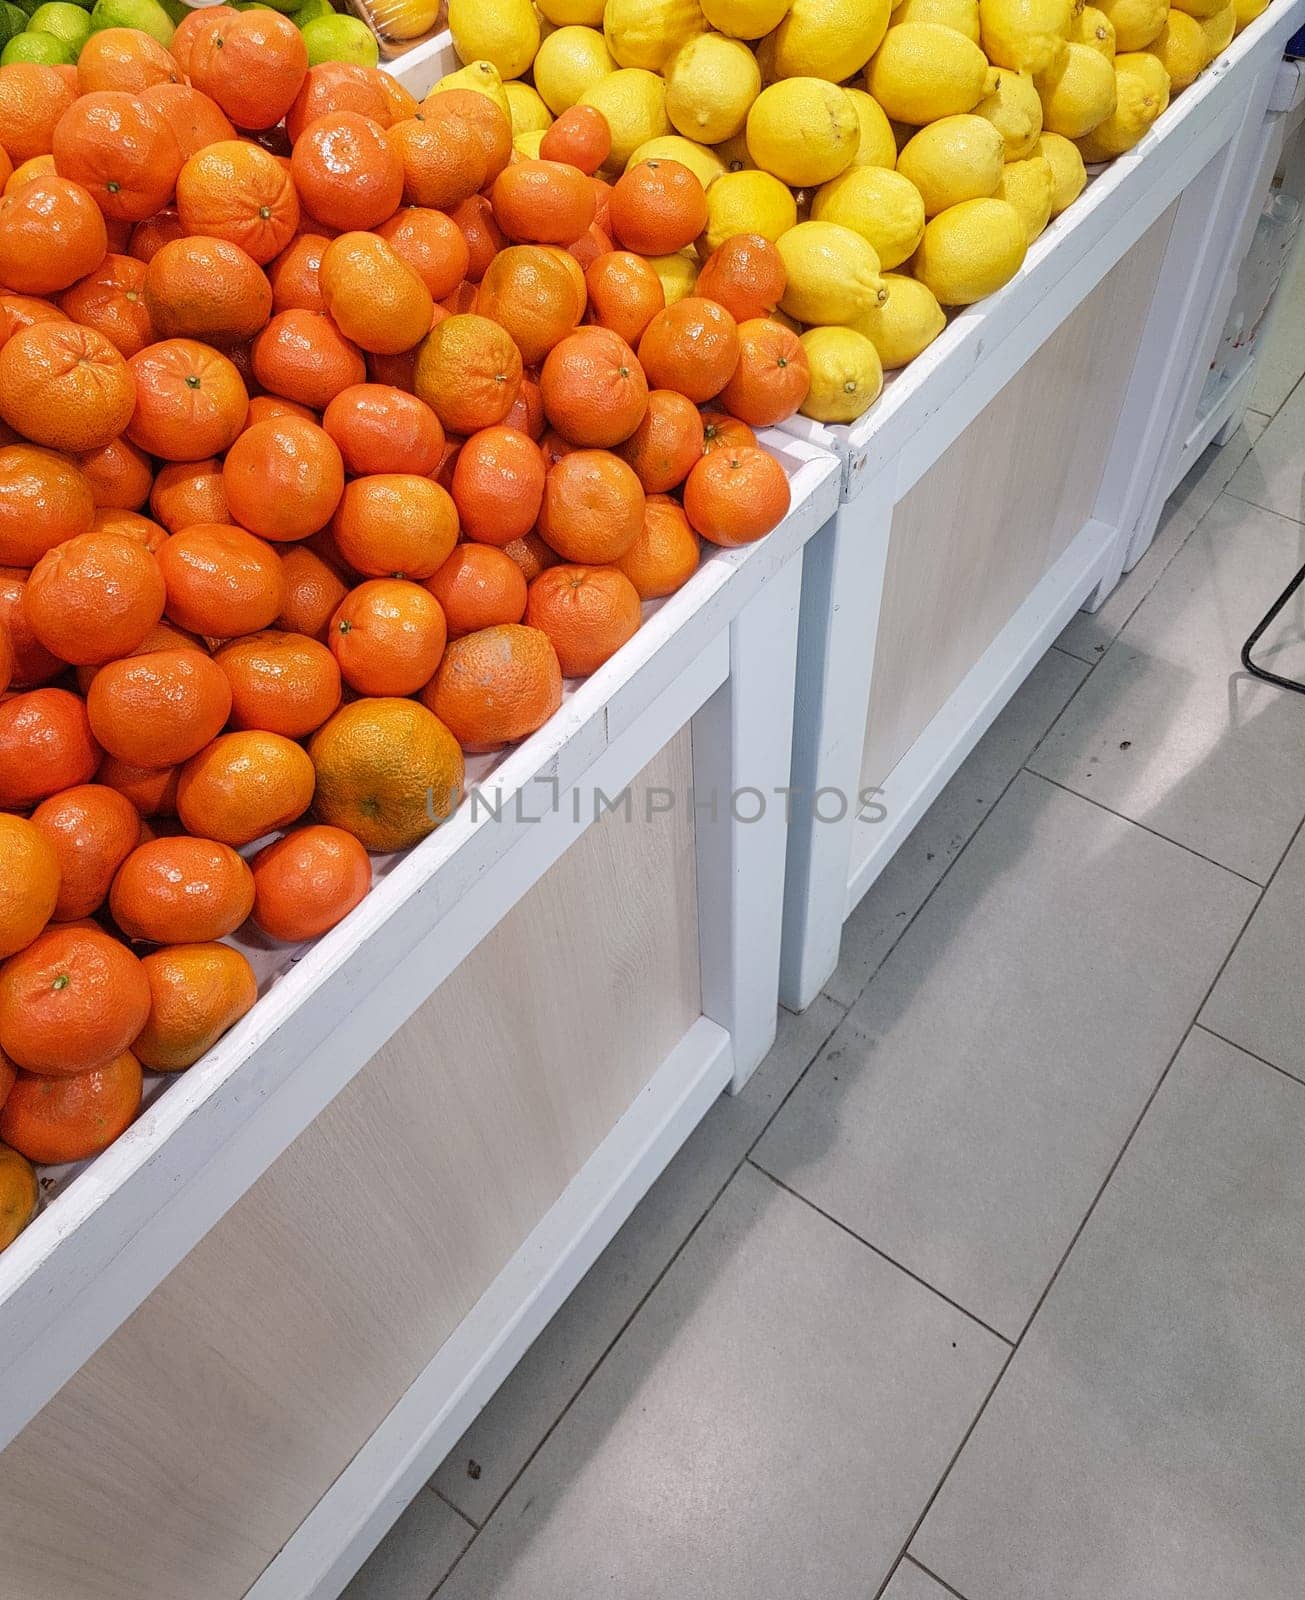 A counter with fresh tropical fruits, tangerines and lemons, close-up, vertical.